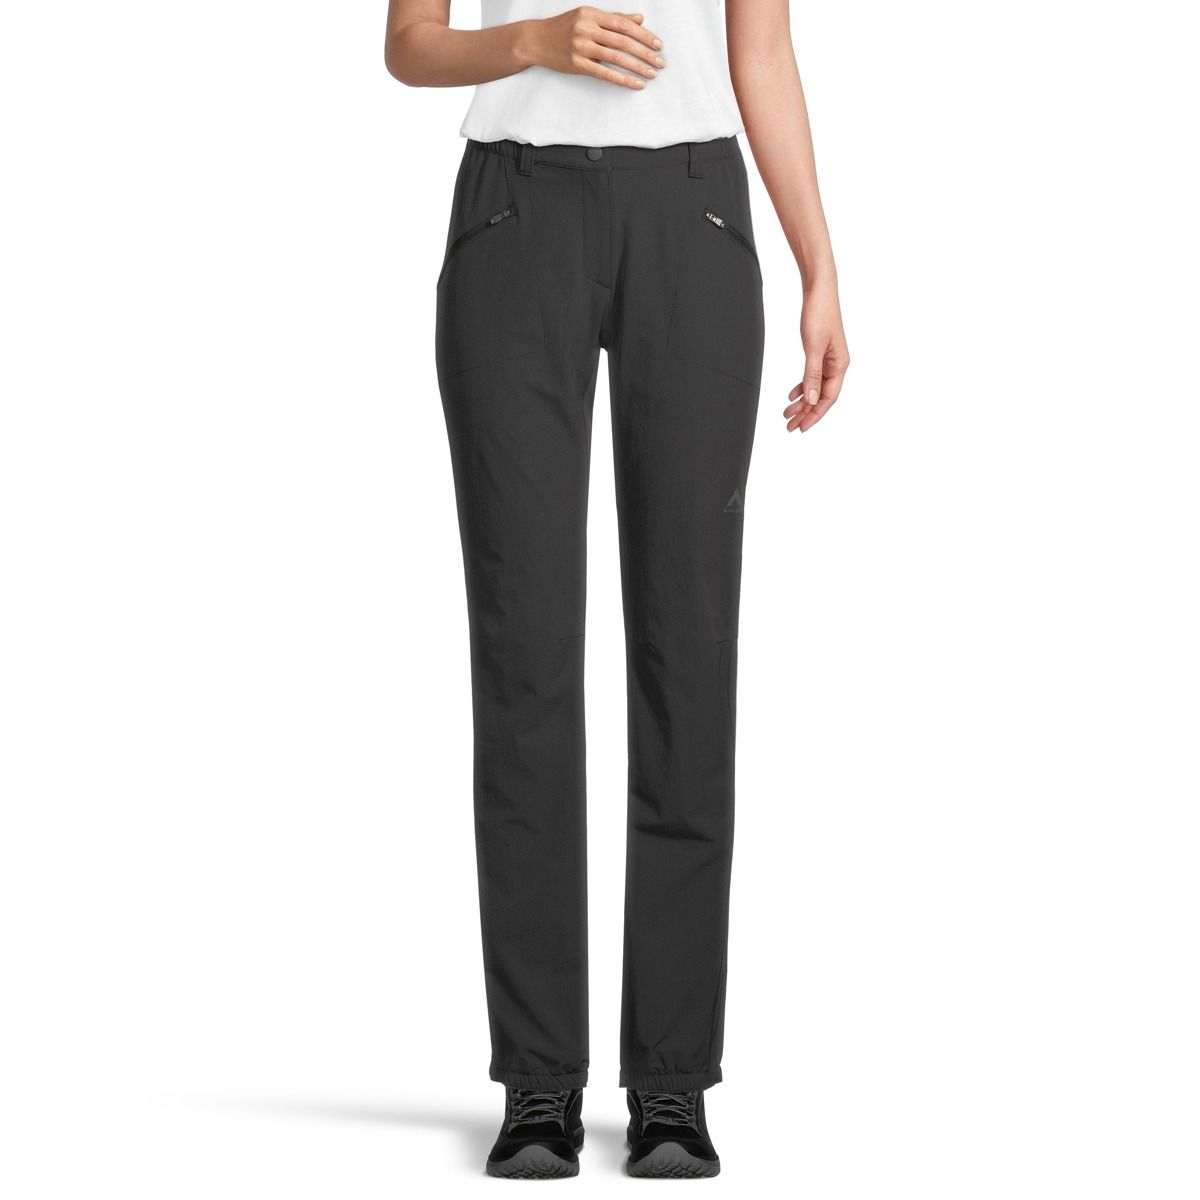 Image of McKinley Women's Beira Pants Outdoor Stretch